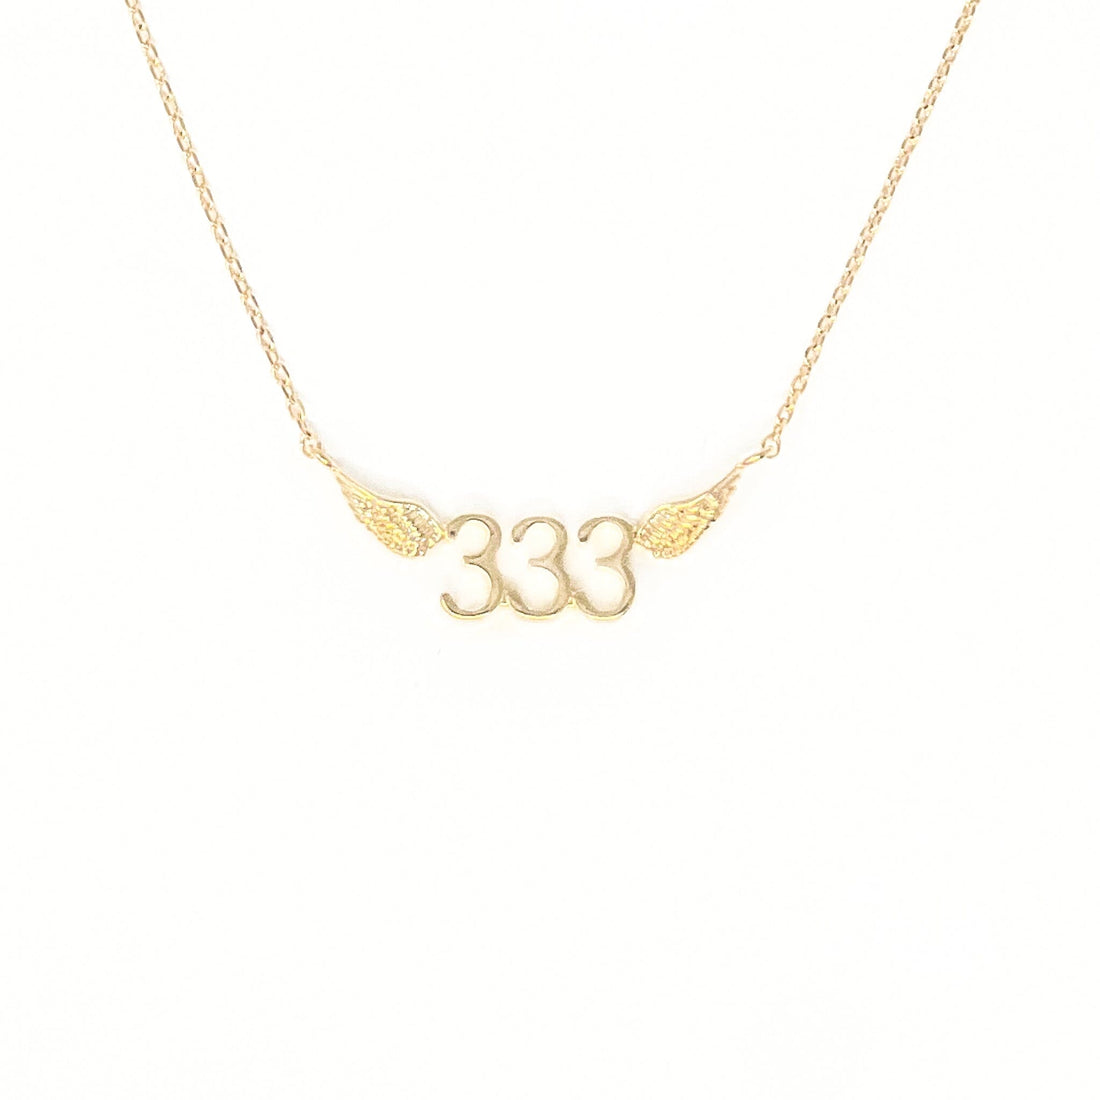 333 Angel Number Necklace (Gold) Necklaces Crystals A. $18.00 